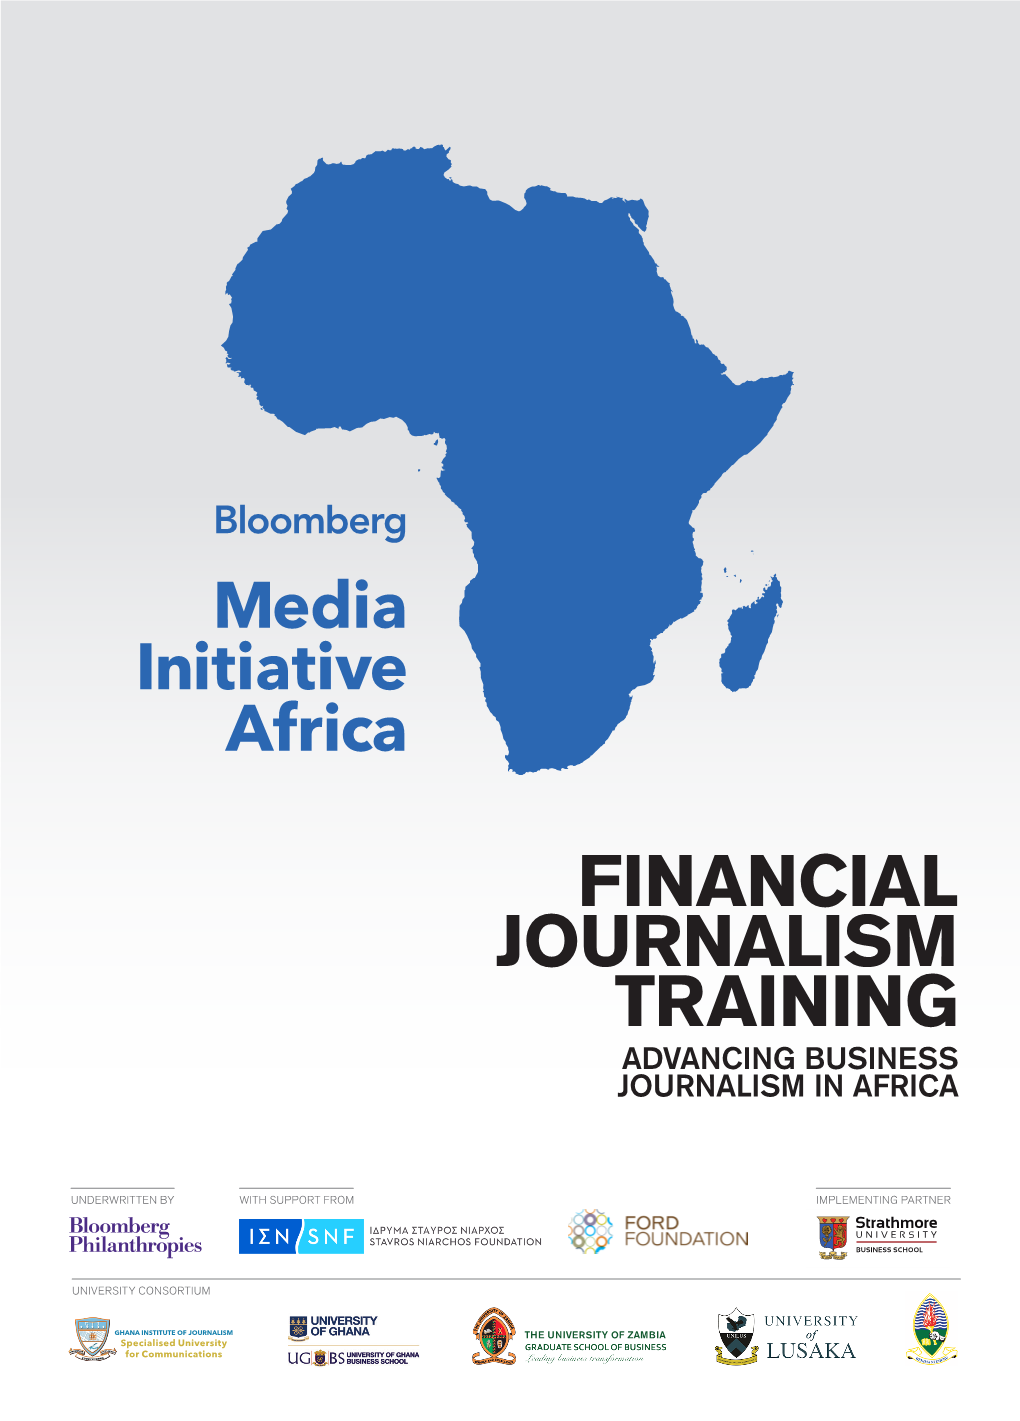 Financial Journalism Training Advancing Business Journalism in Africa